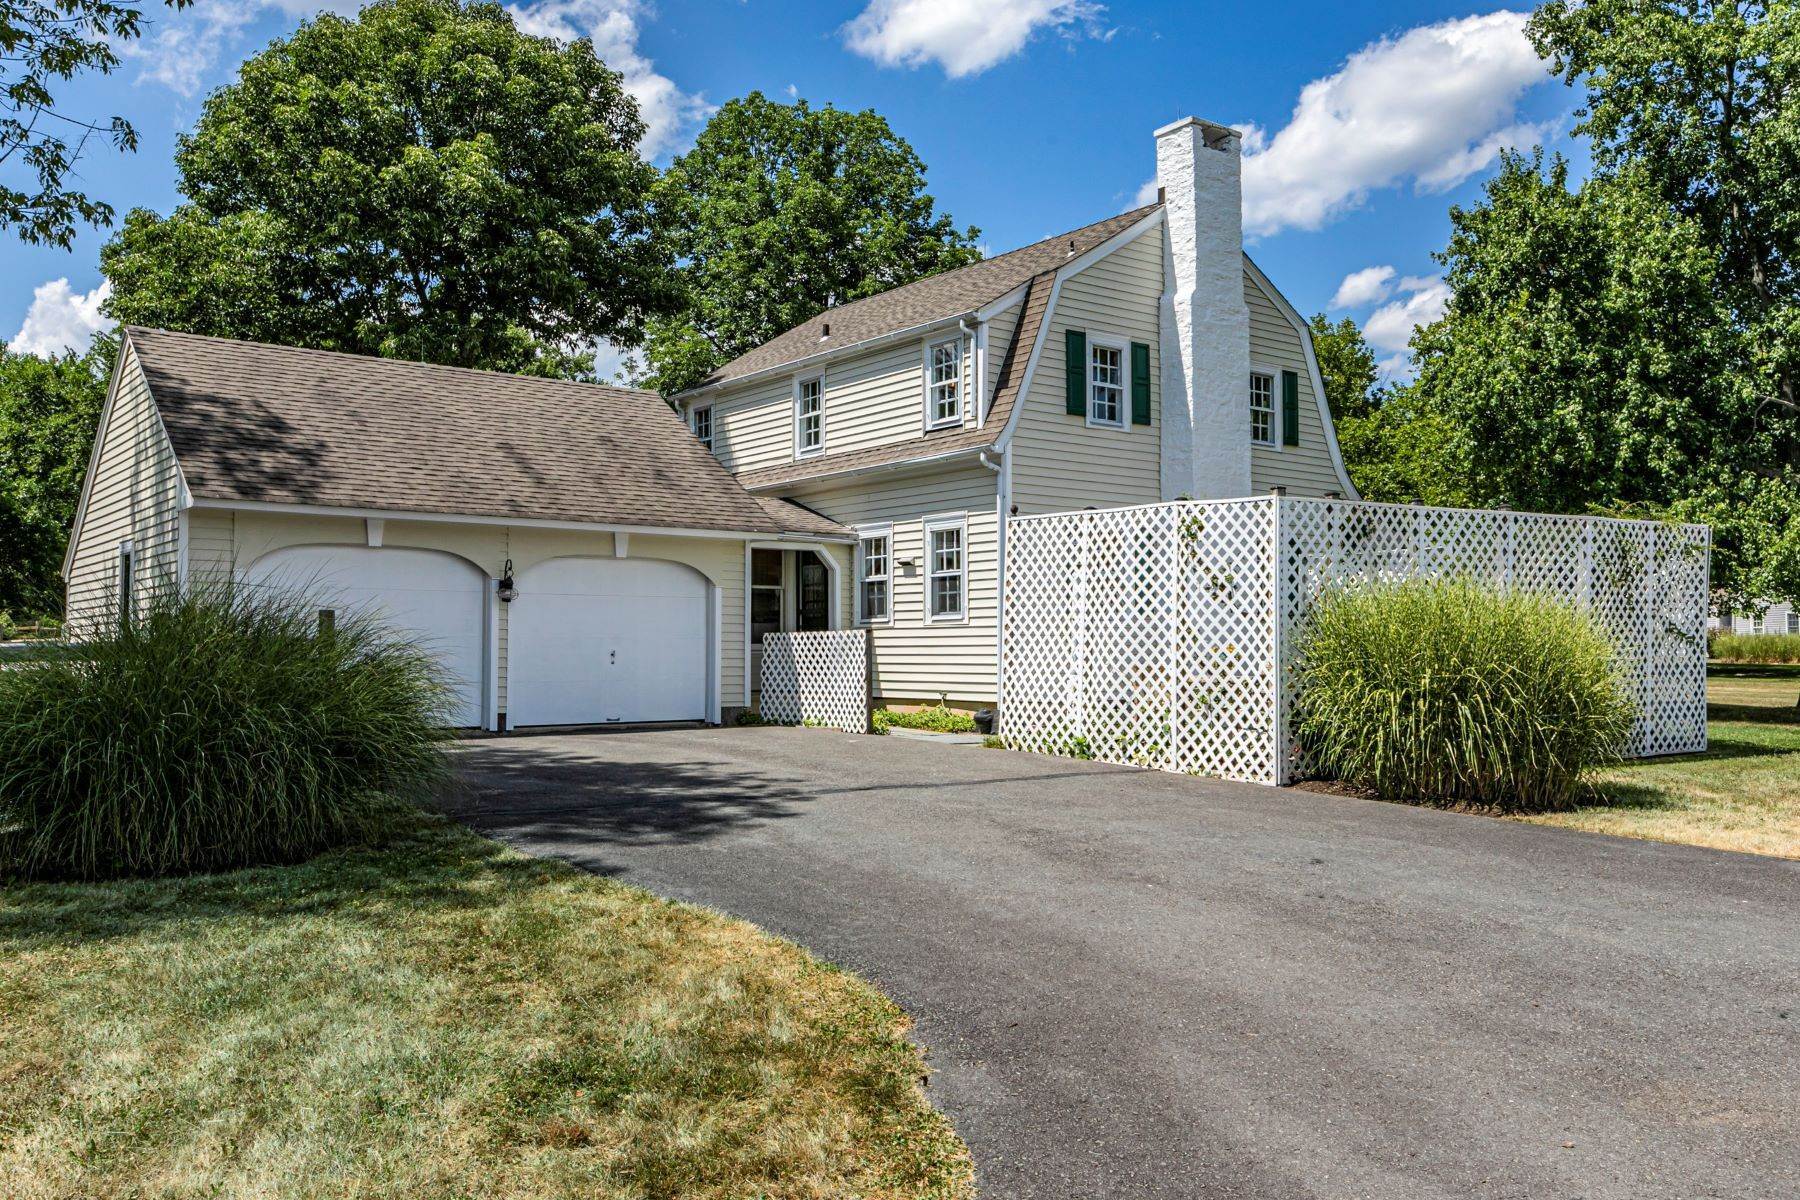 25. Single Family Homes for Sale at Darling Dutch Colonial with Pretty Farmland Views 3 Coventry Farm Lane, Princeton, New Jersey 08540 United States